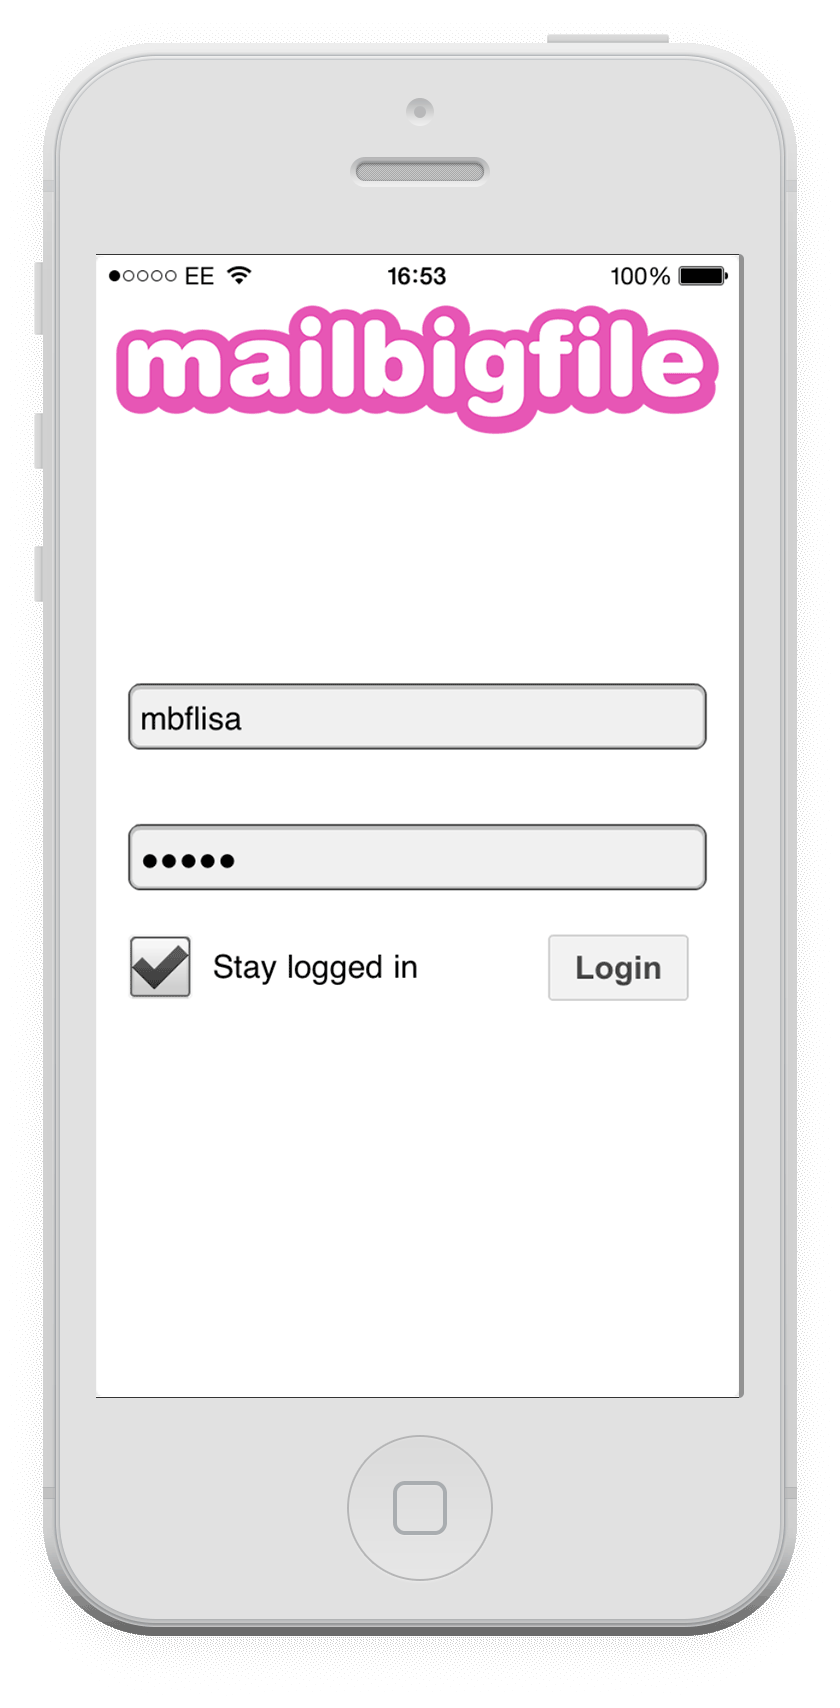 Login Screen with user credentials